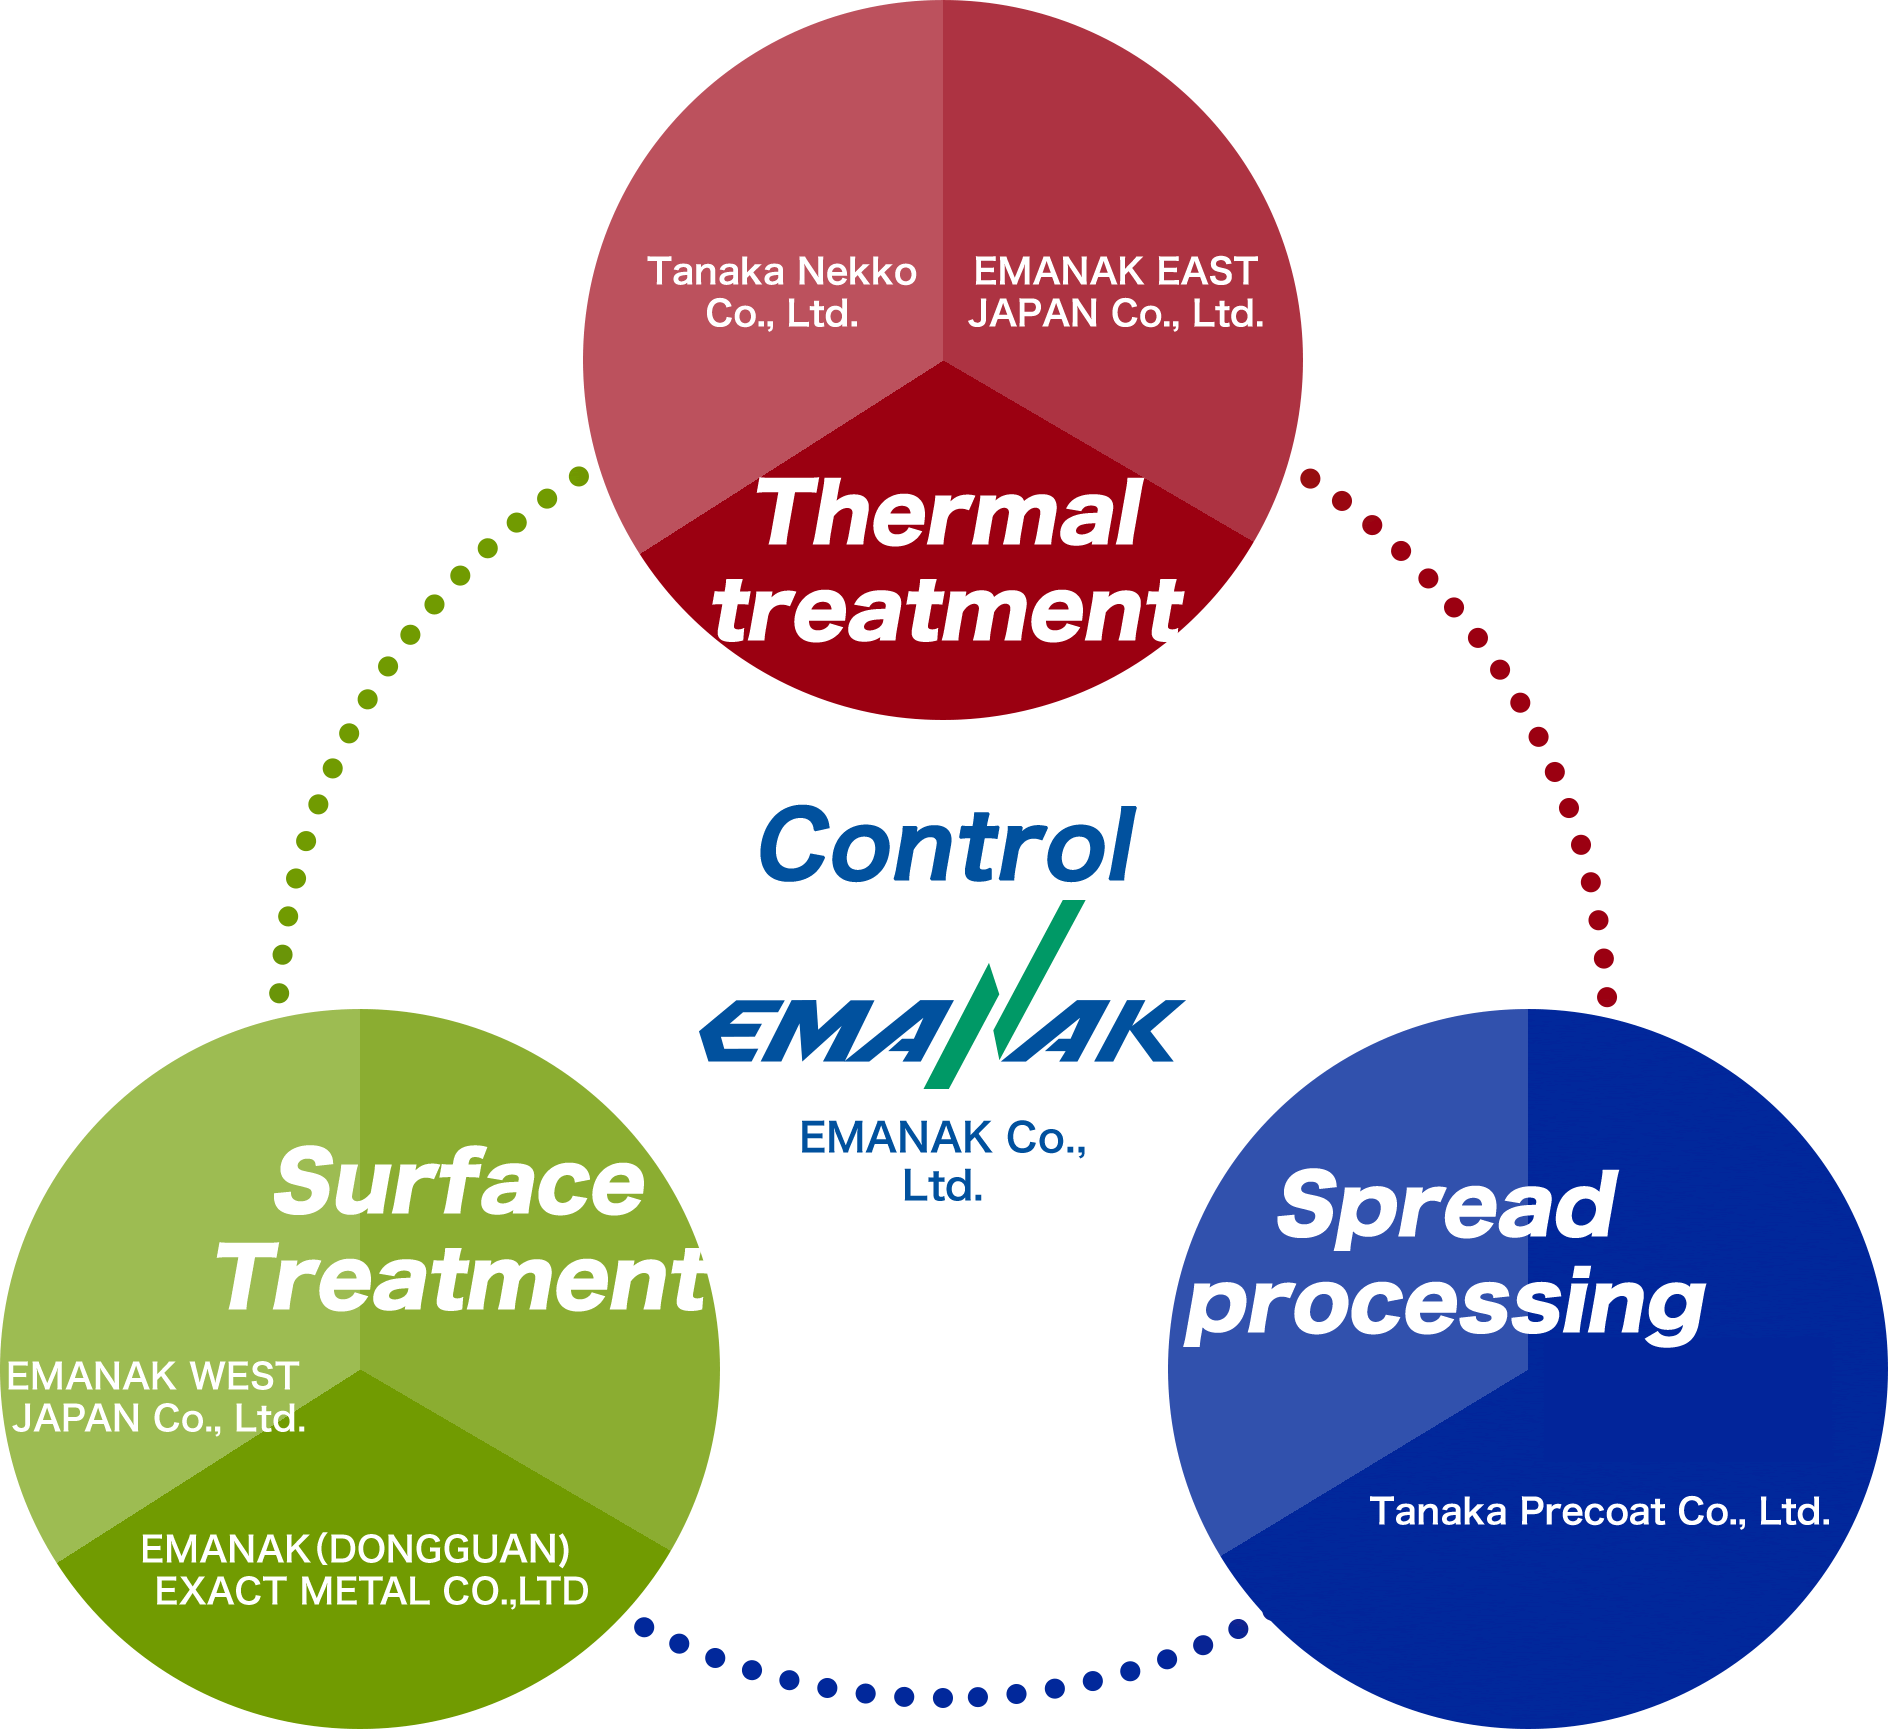 Structure of Emanac Group for metal heat treatment, surface treatment and coating